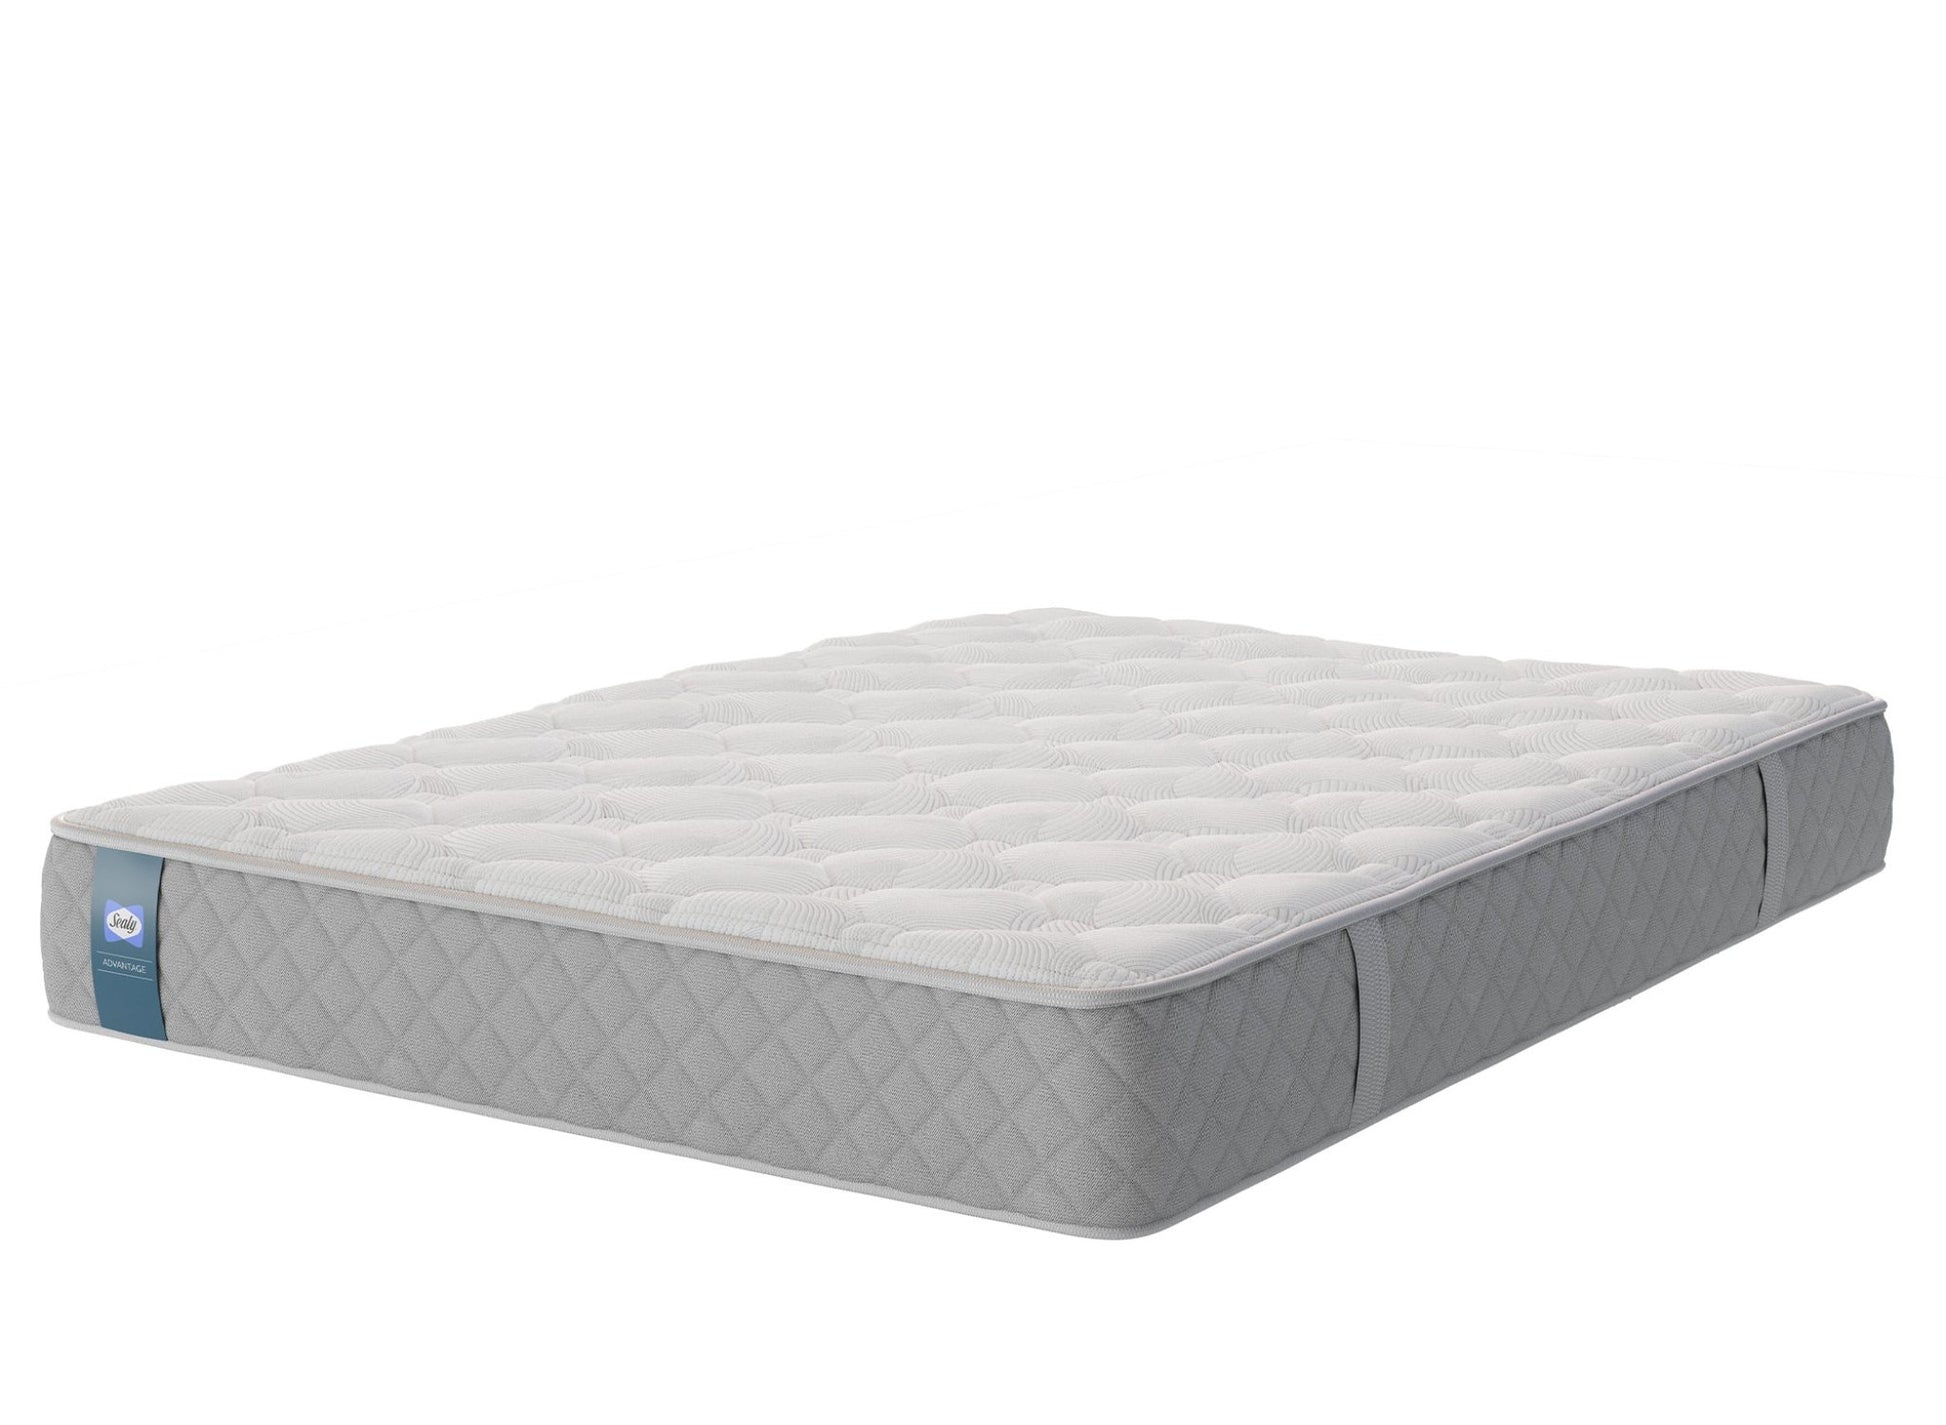 Sealy Astwick Wool Mattresses - Advantage Collection by Sealy in 5059712003729 only at TV Beds Northwest